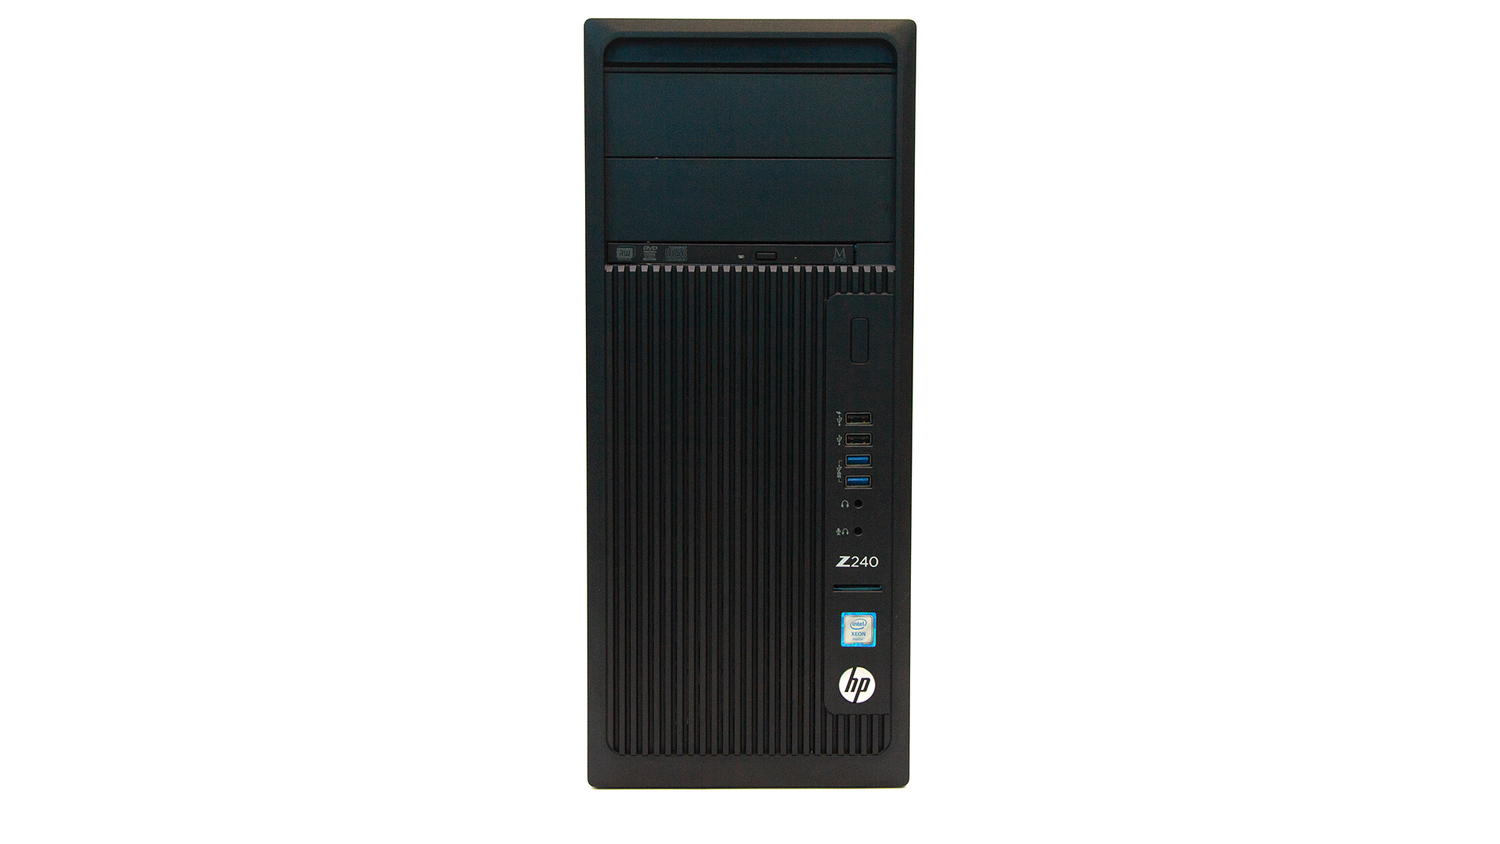 Refurbished HP z240 Tower Workstation | Buy Now from just £212.50